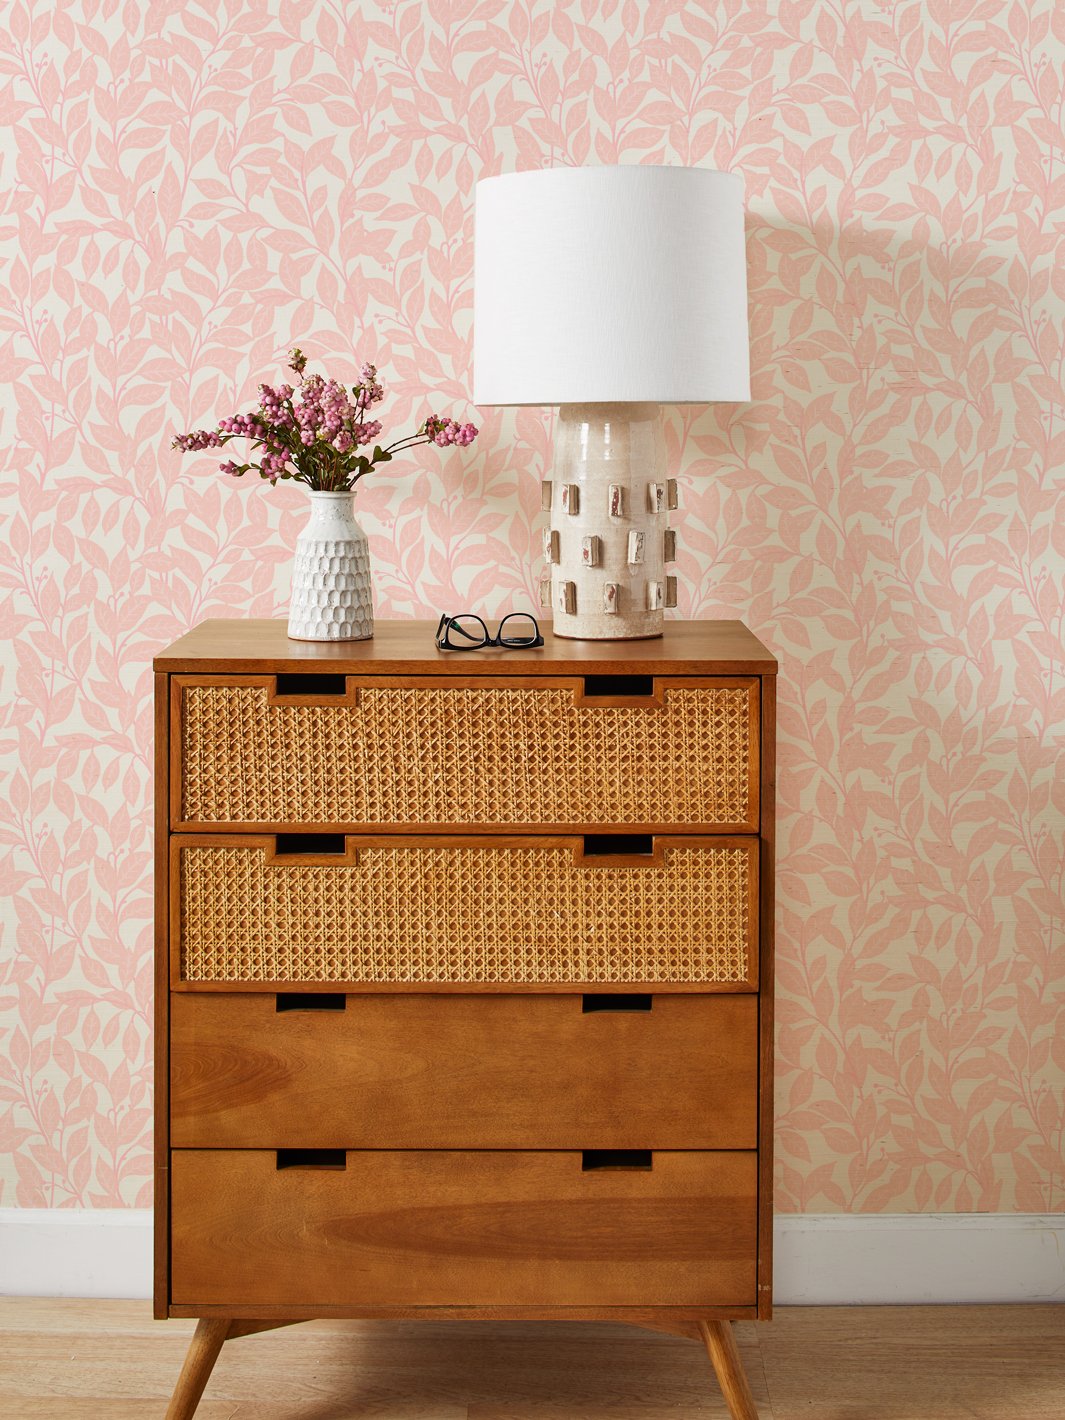 'Orchard Leaves' Grasscloth' Wallpaper by Wallshoppe - Pink